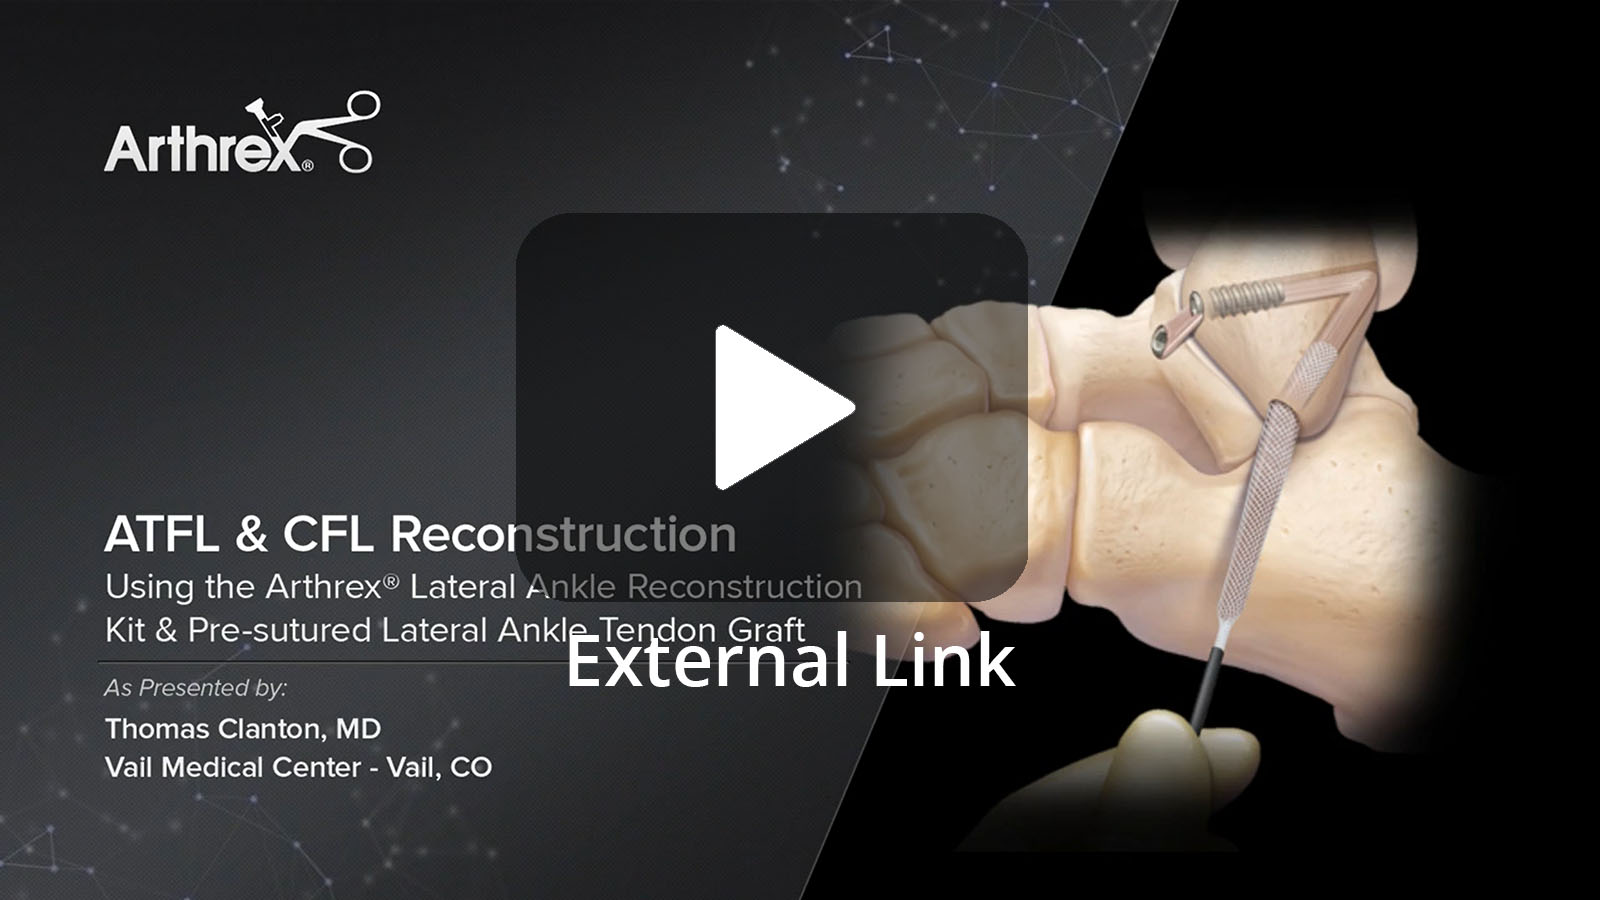 Thomas Clanton, MD, (Vail, CO) demonstrates how to perform a Lateral Ankle Reconstruction of the ATFL and CFL utilizing the Arthrex Lateral Ankle Reconstruction System in conjunction with the Pre-Sutured Lateral Ankle Tendon Allograft. (External Link)